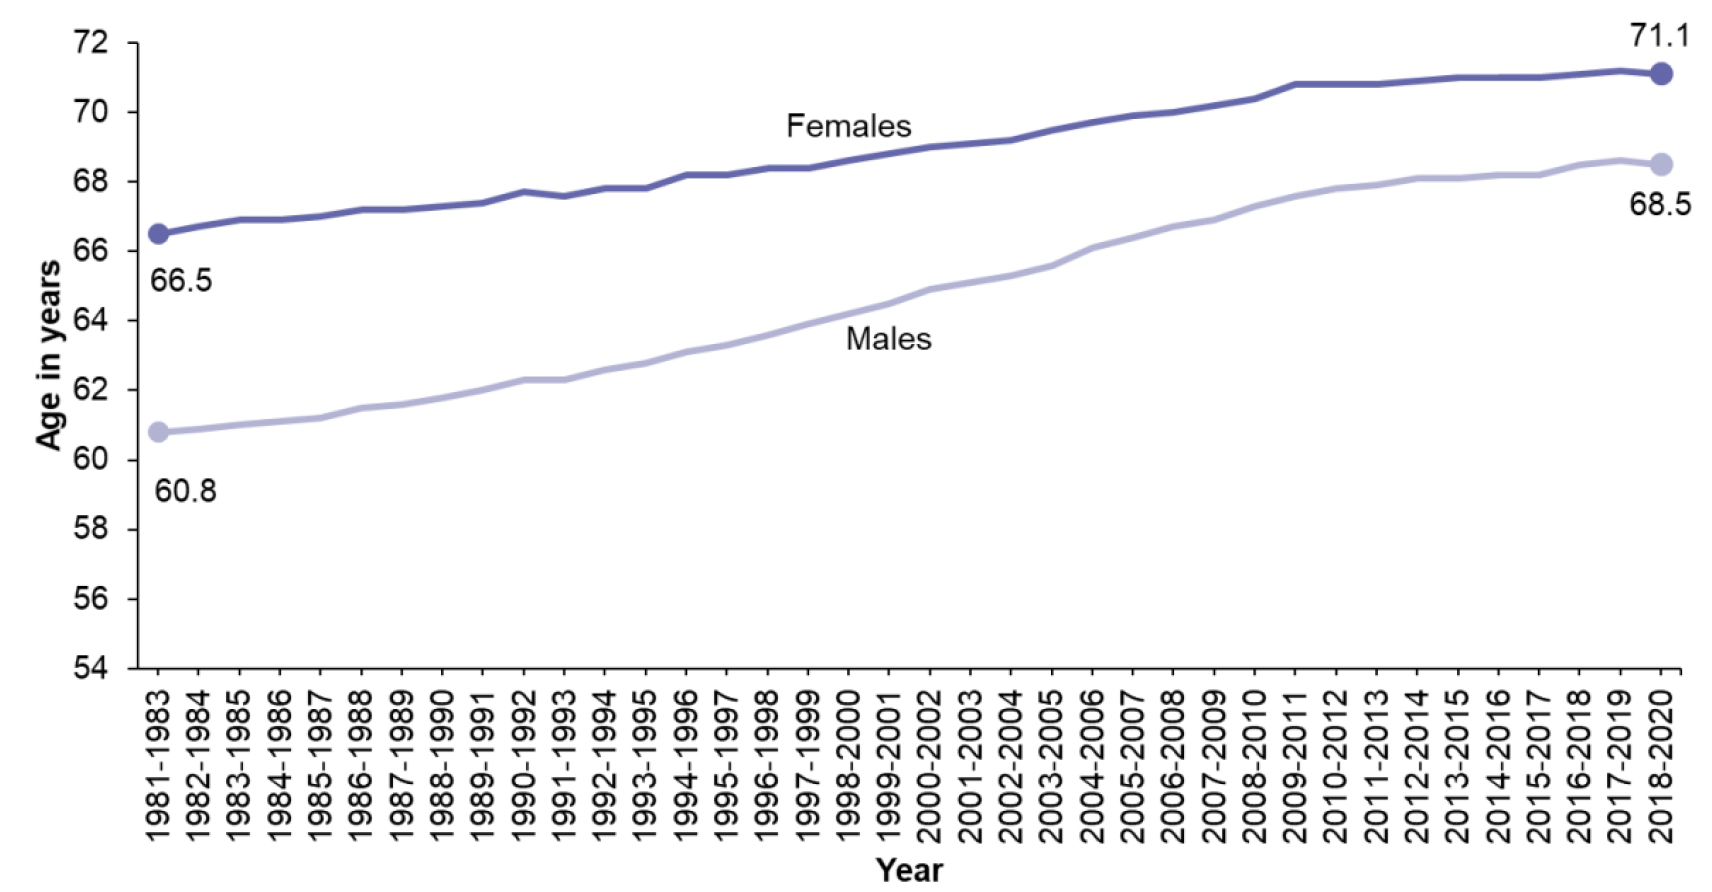 Line chart shows that the average age at which a person has 15 years remaining life expectancy increased by 7.7 years for males and 4.6 years for females between 1981-1983 and 2018-2020.